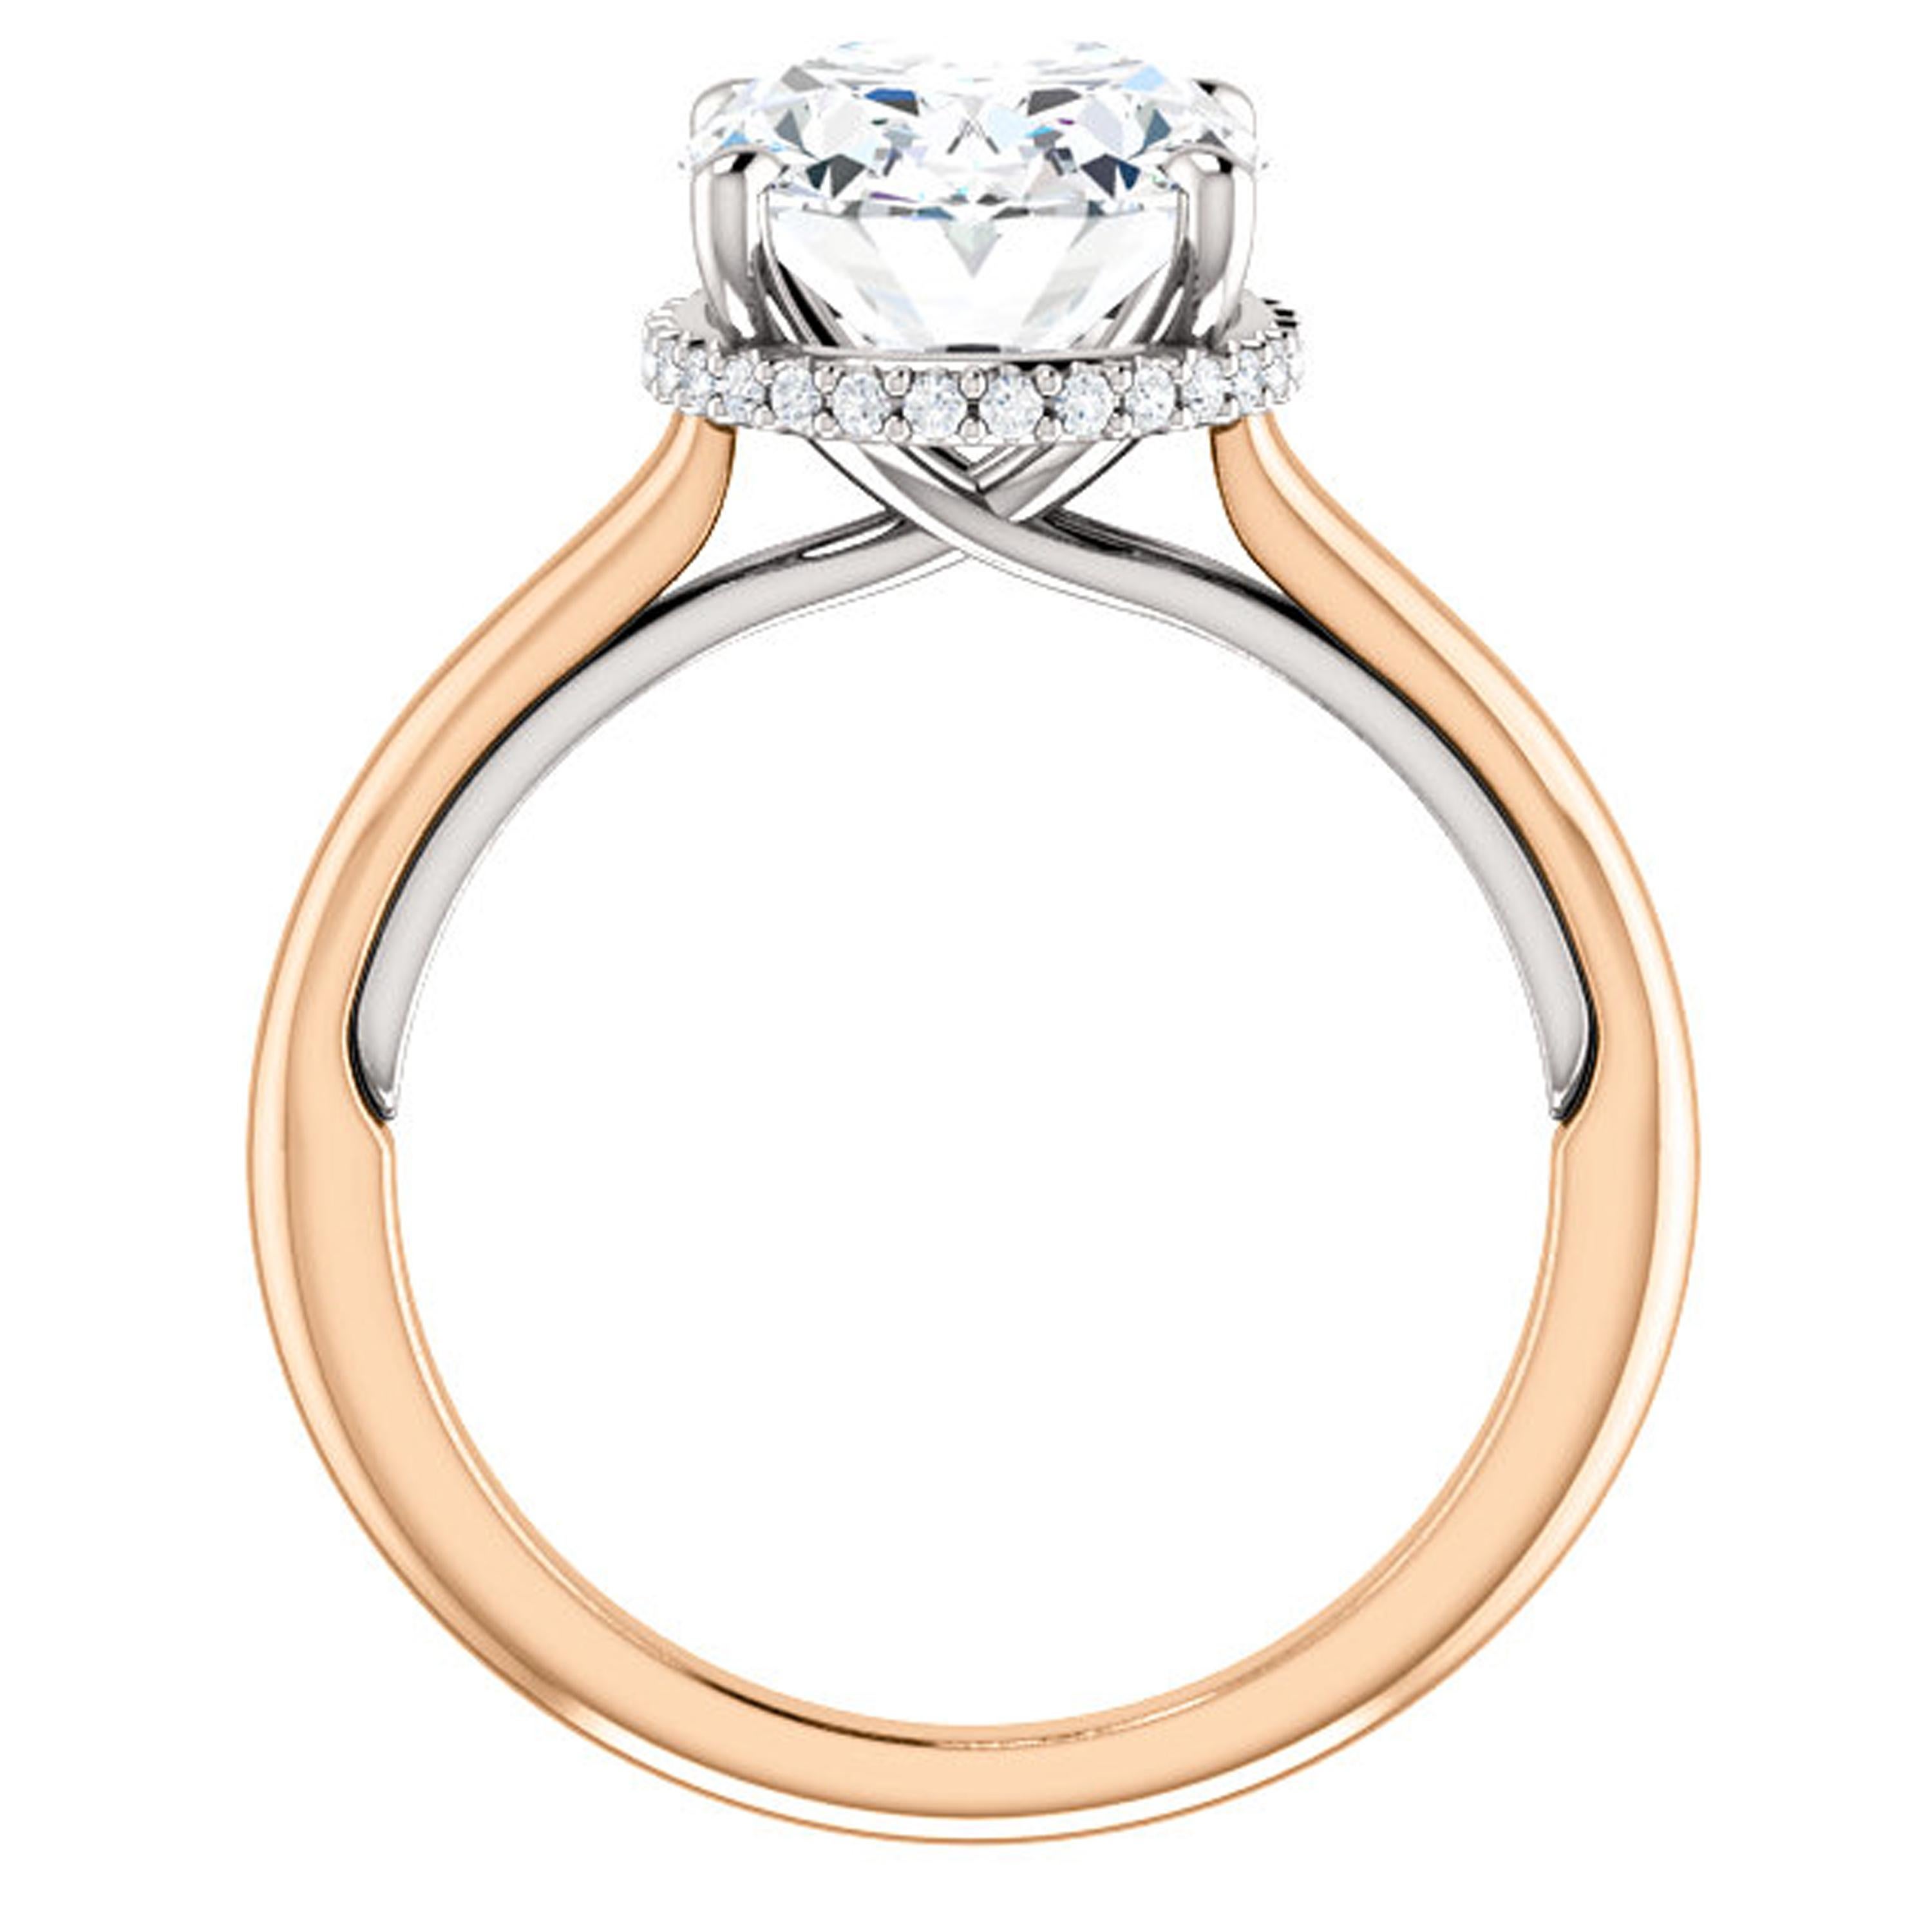 This plain shank engagement ring showcases a surprise halo visible through the gallery lined with shimmering diamonds. The breathtaking outline is amplified with an oval cut Forever One certified moissanite. This beautiful ring is handcrafted and